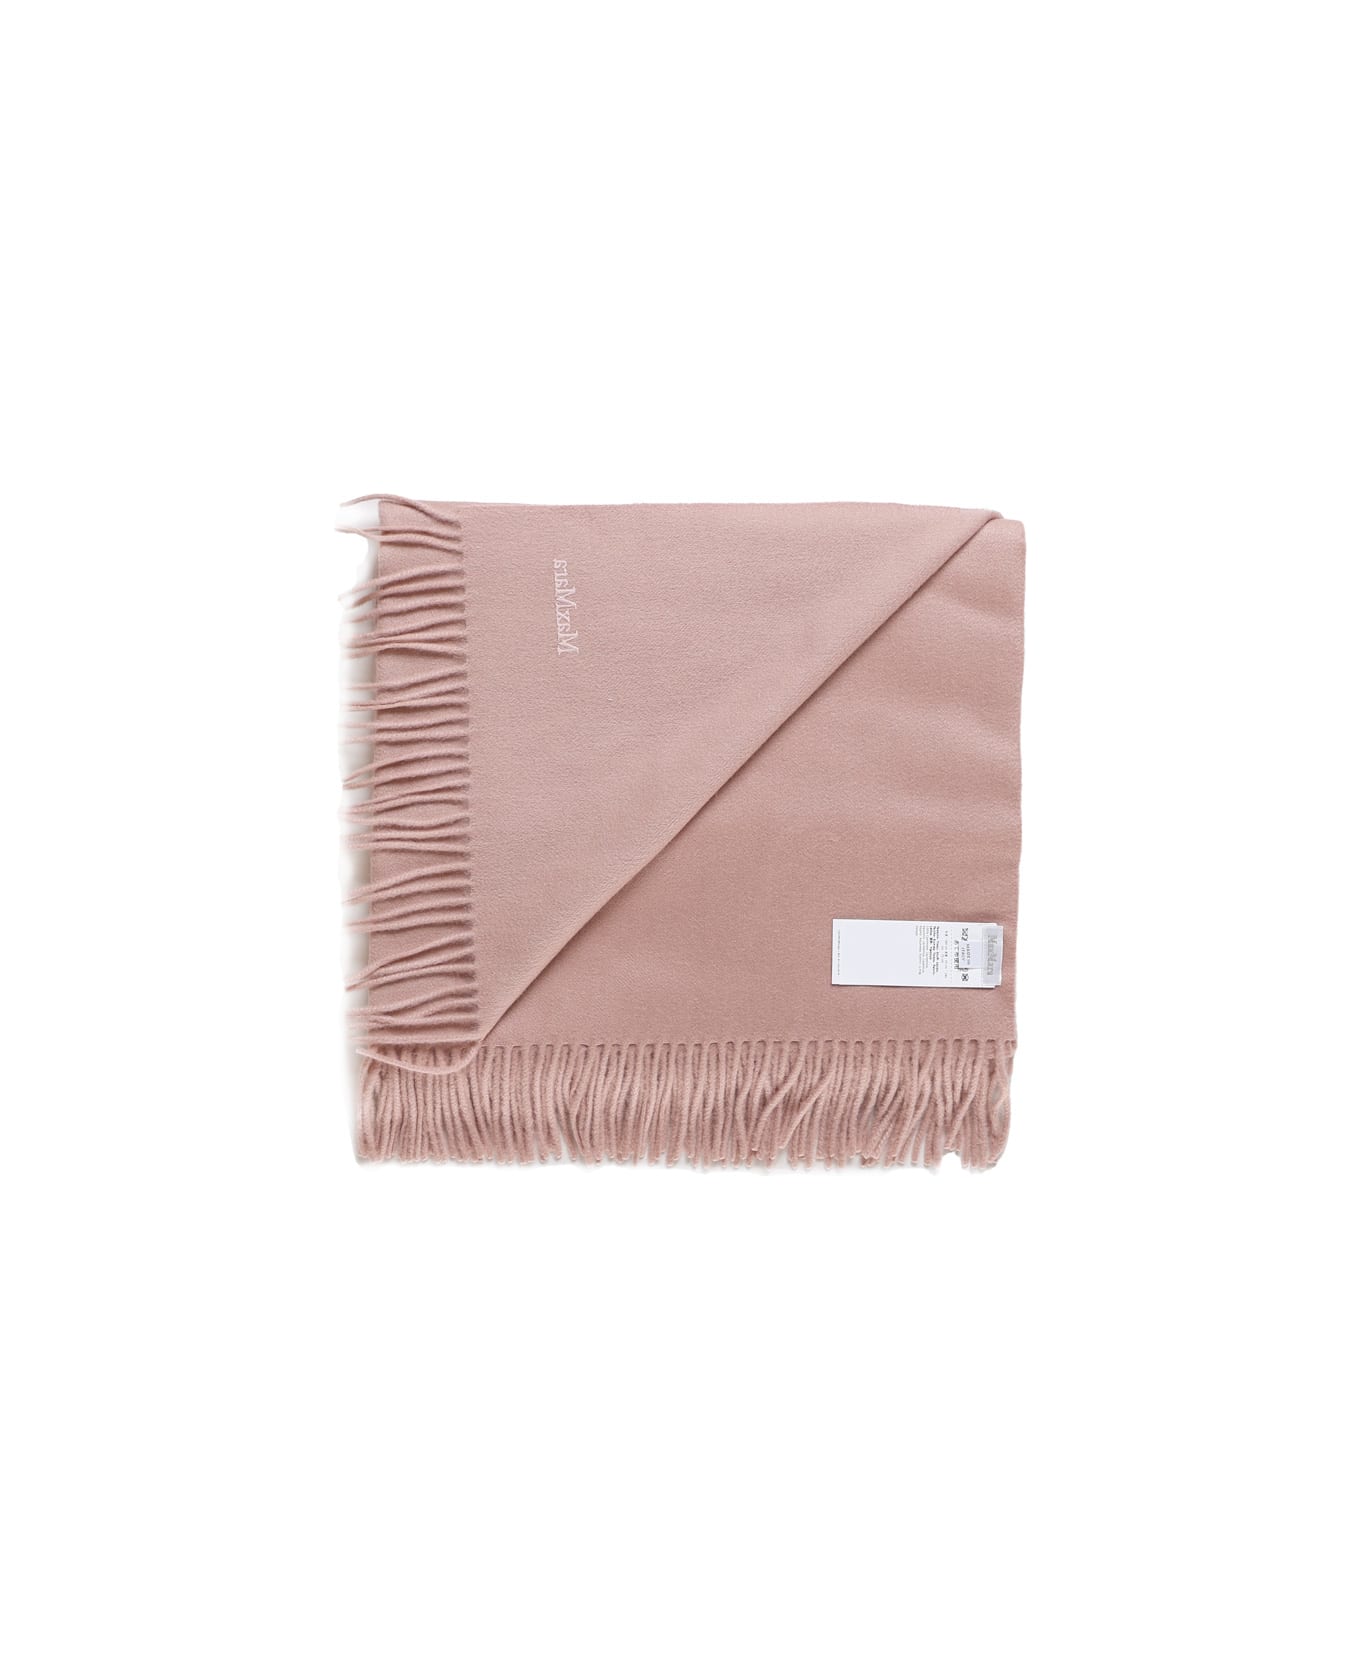 Max Mara Stole In Pure Sable Cashmere - Pink スカーフ＆ストール